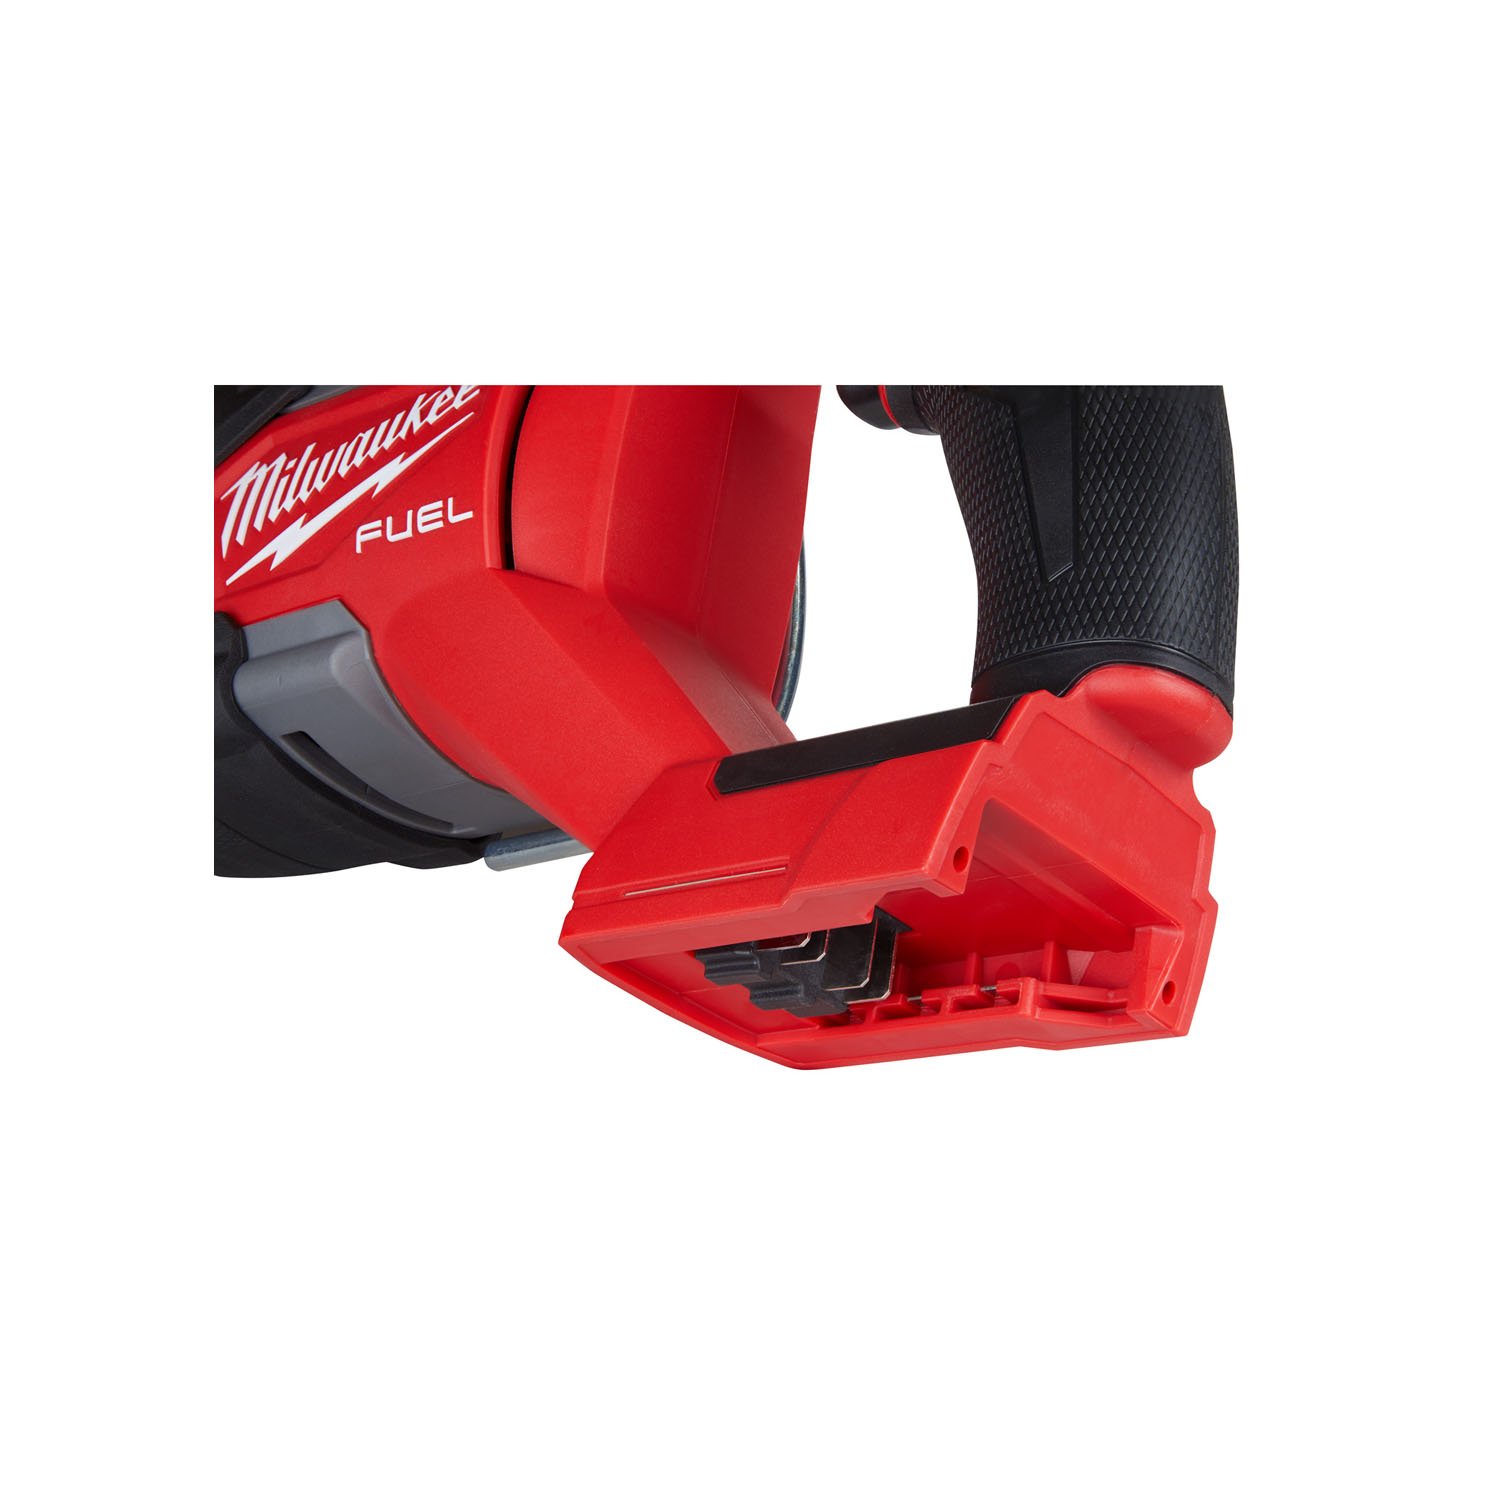 M18 FUEL OSCILLATING MULTI-TOOL (TOOL ONLY)